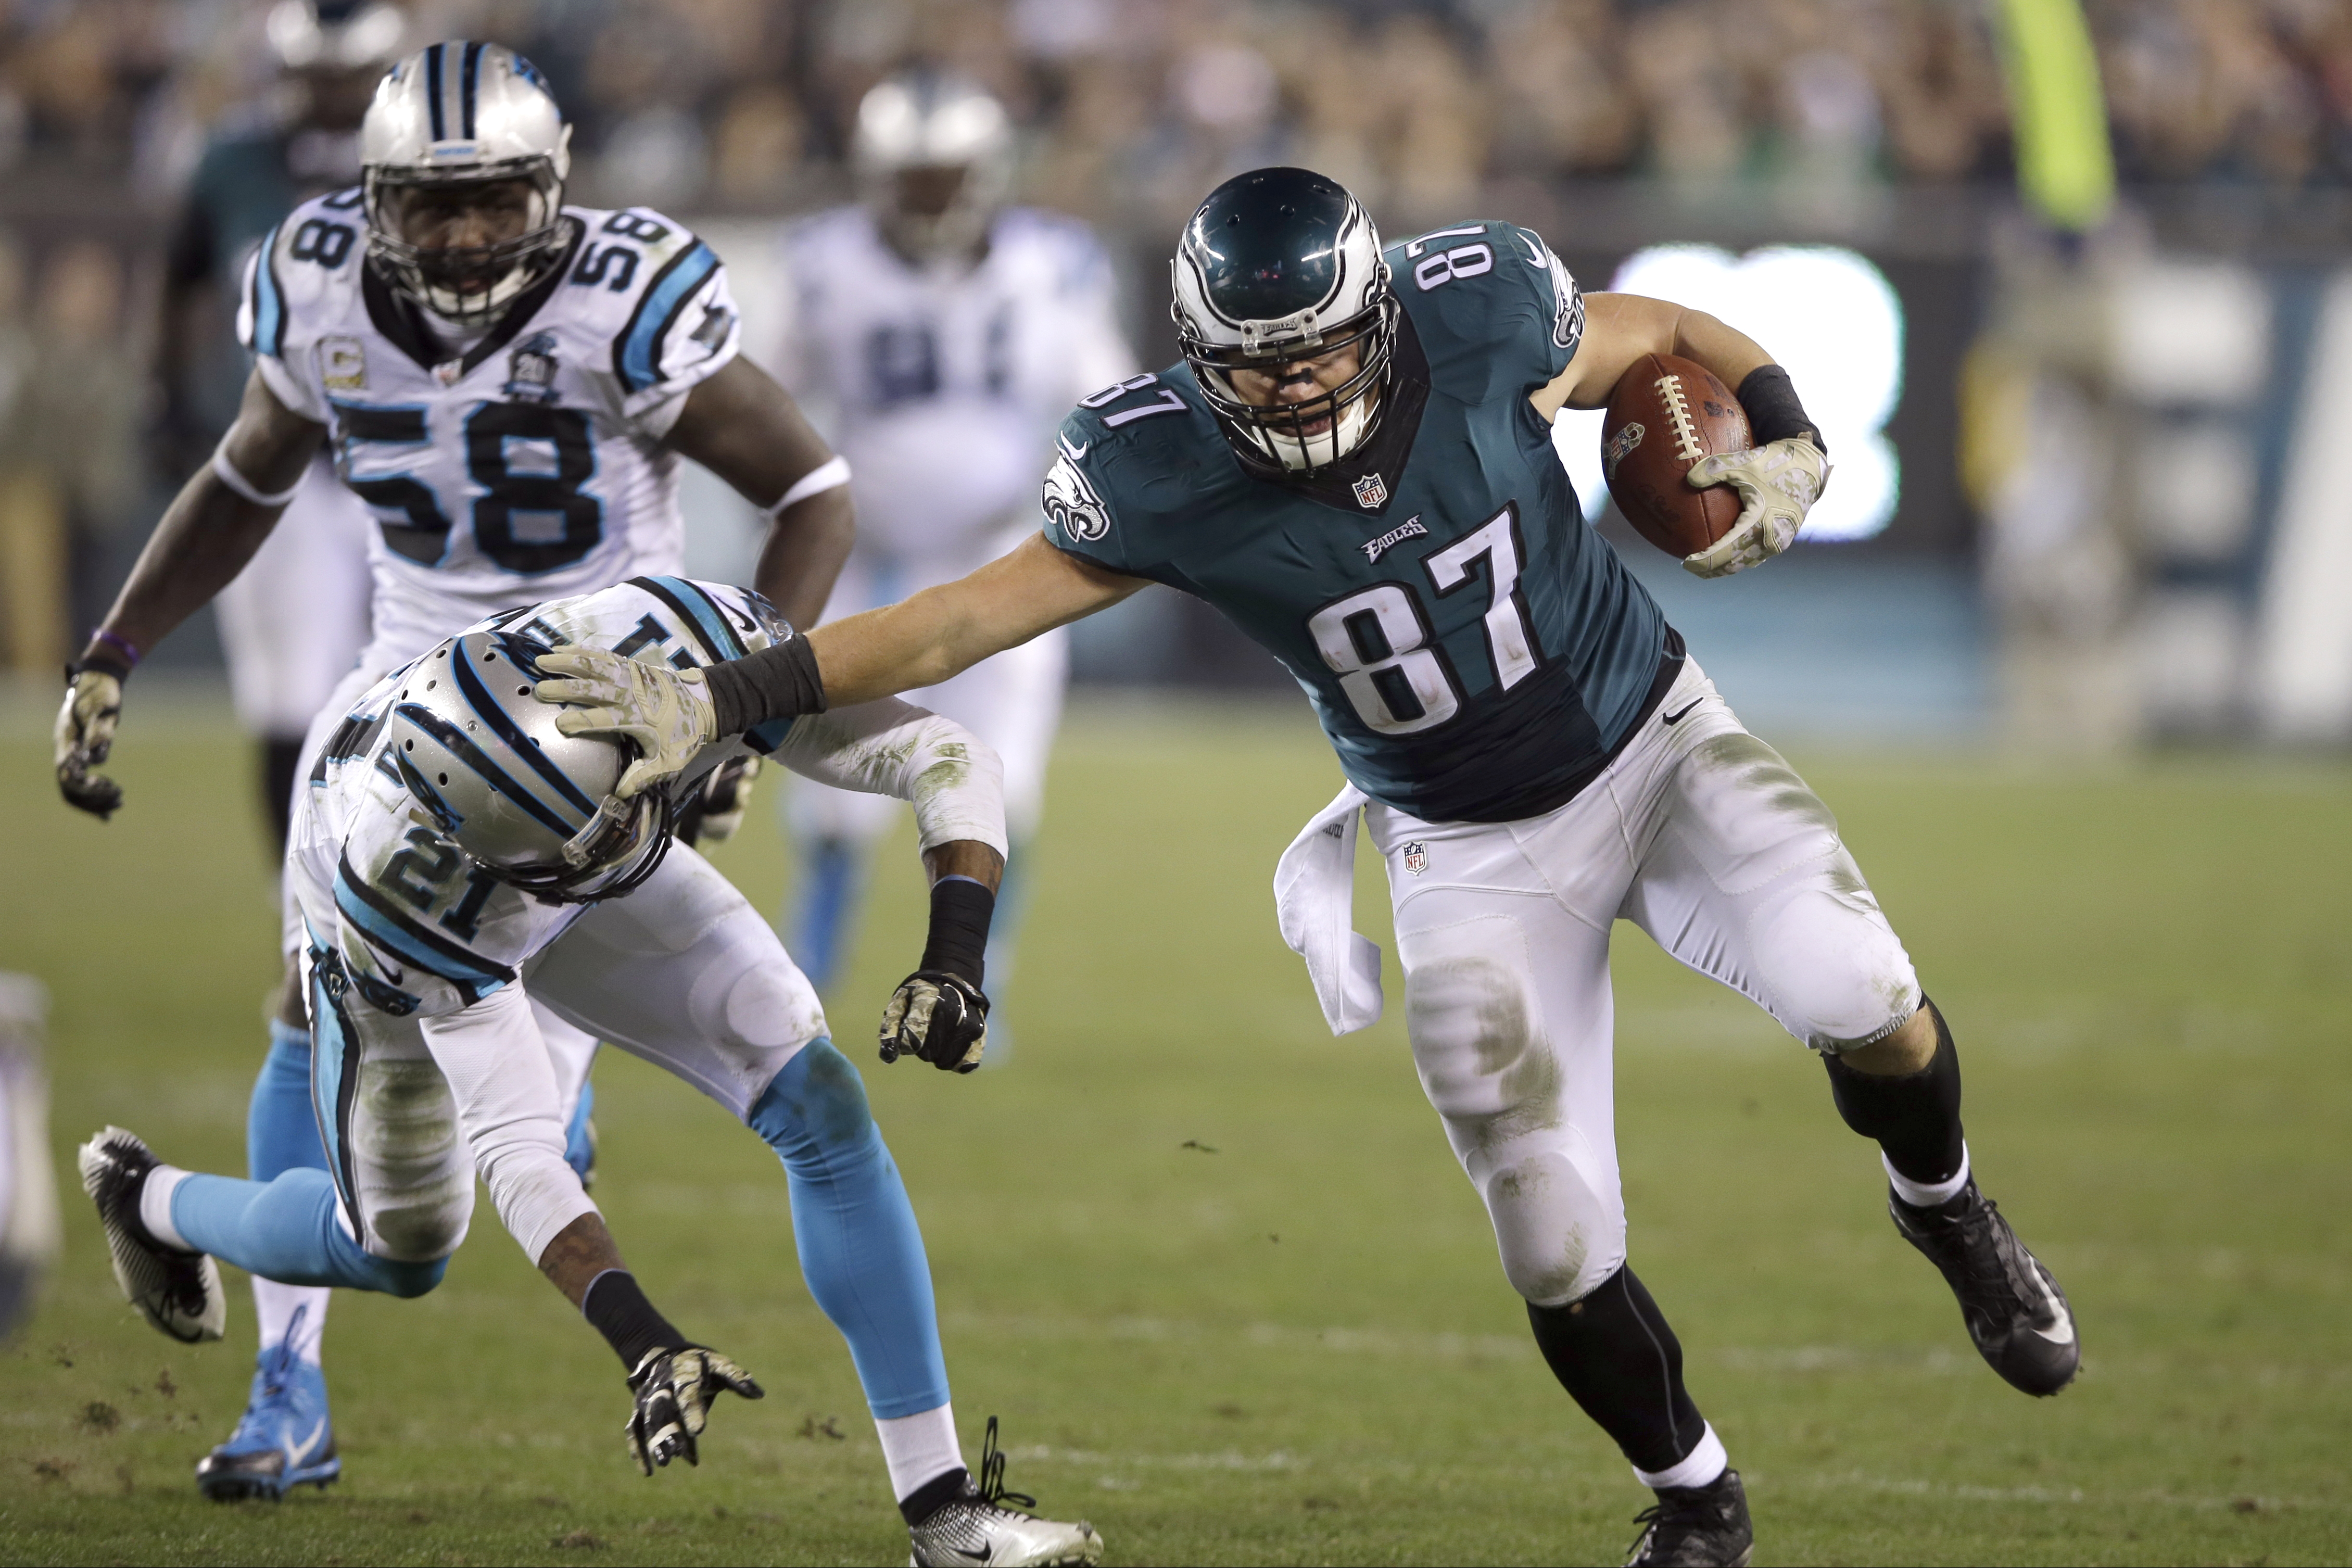 Brent Celek Has Been A Bulldog At The Tight End Position